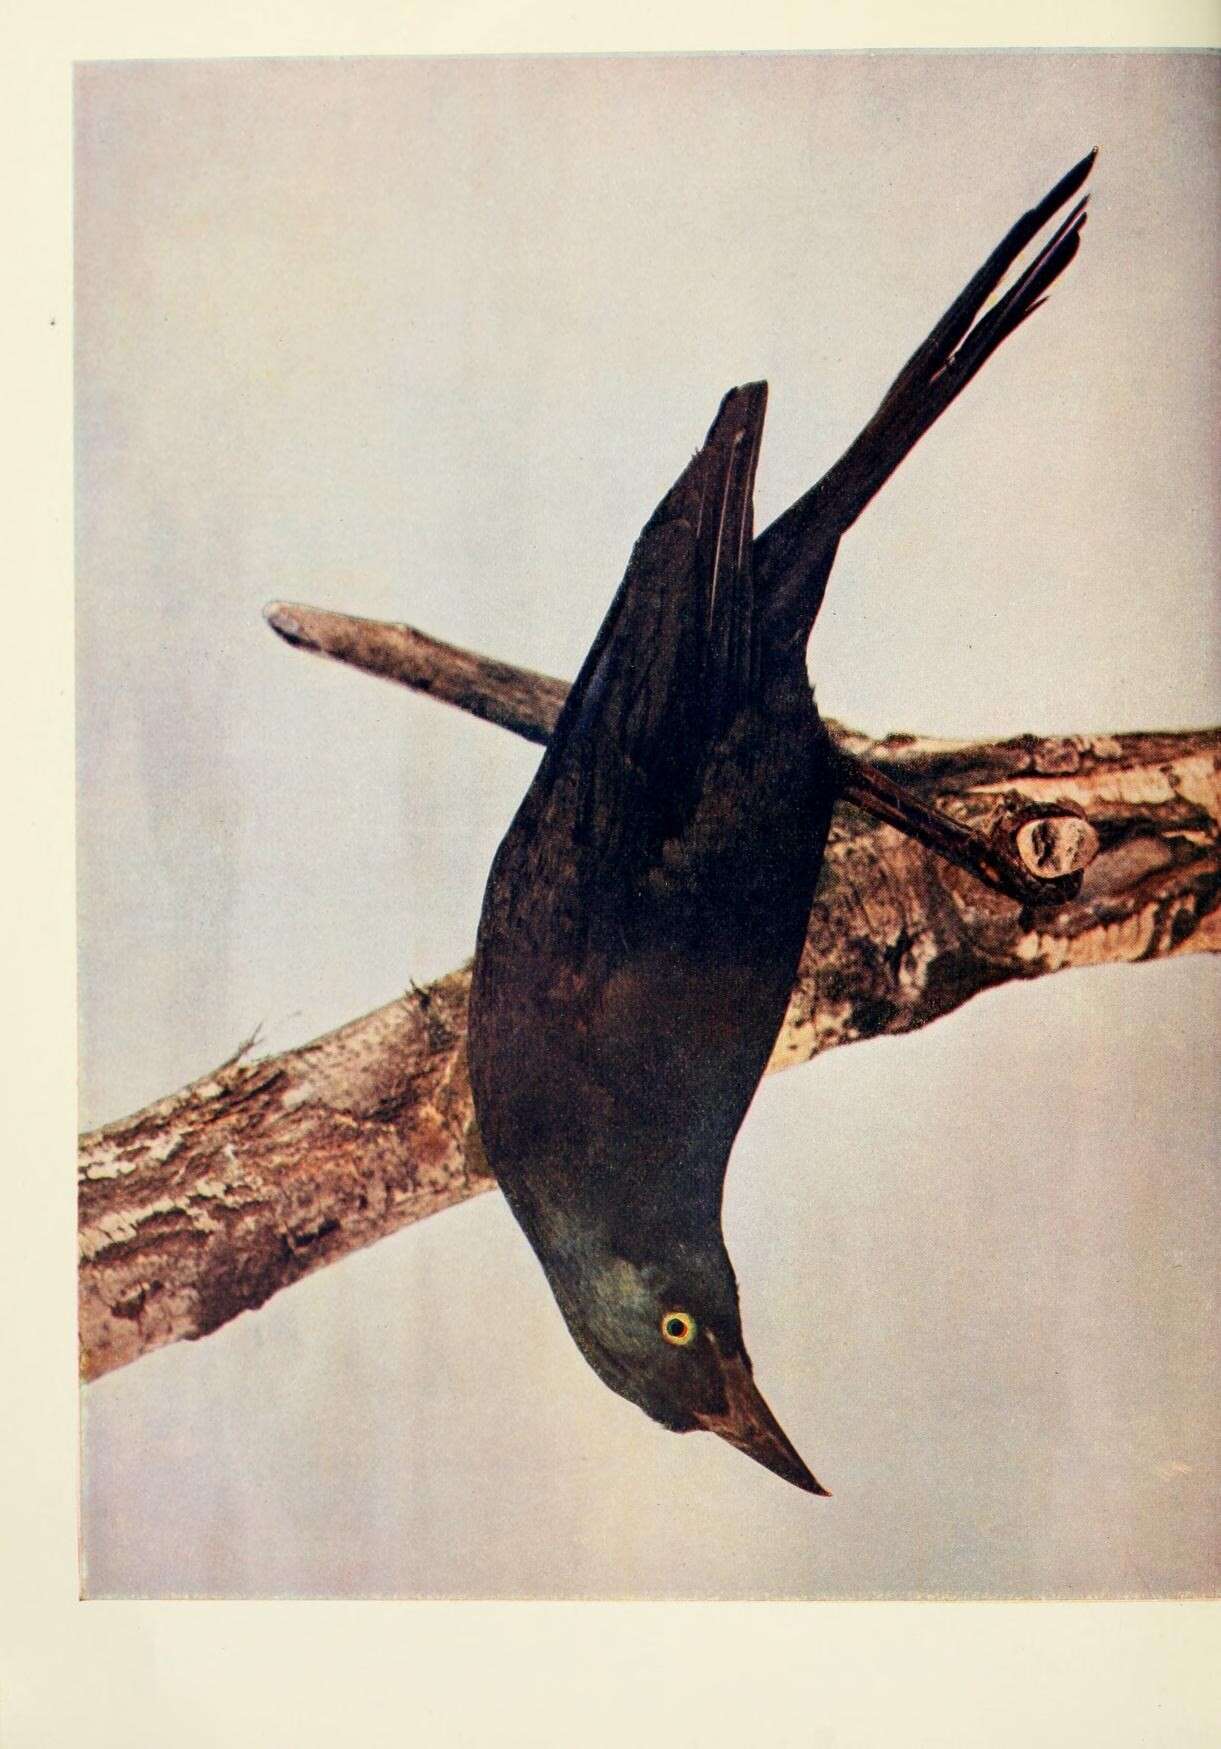 Image of Common Grackle